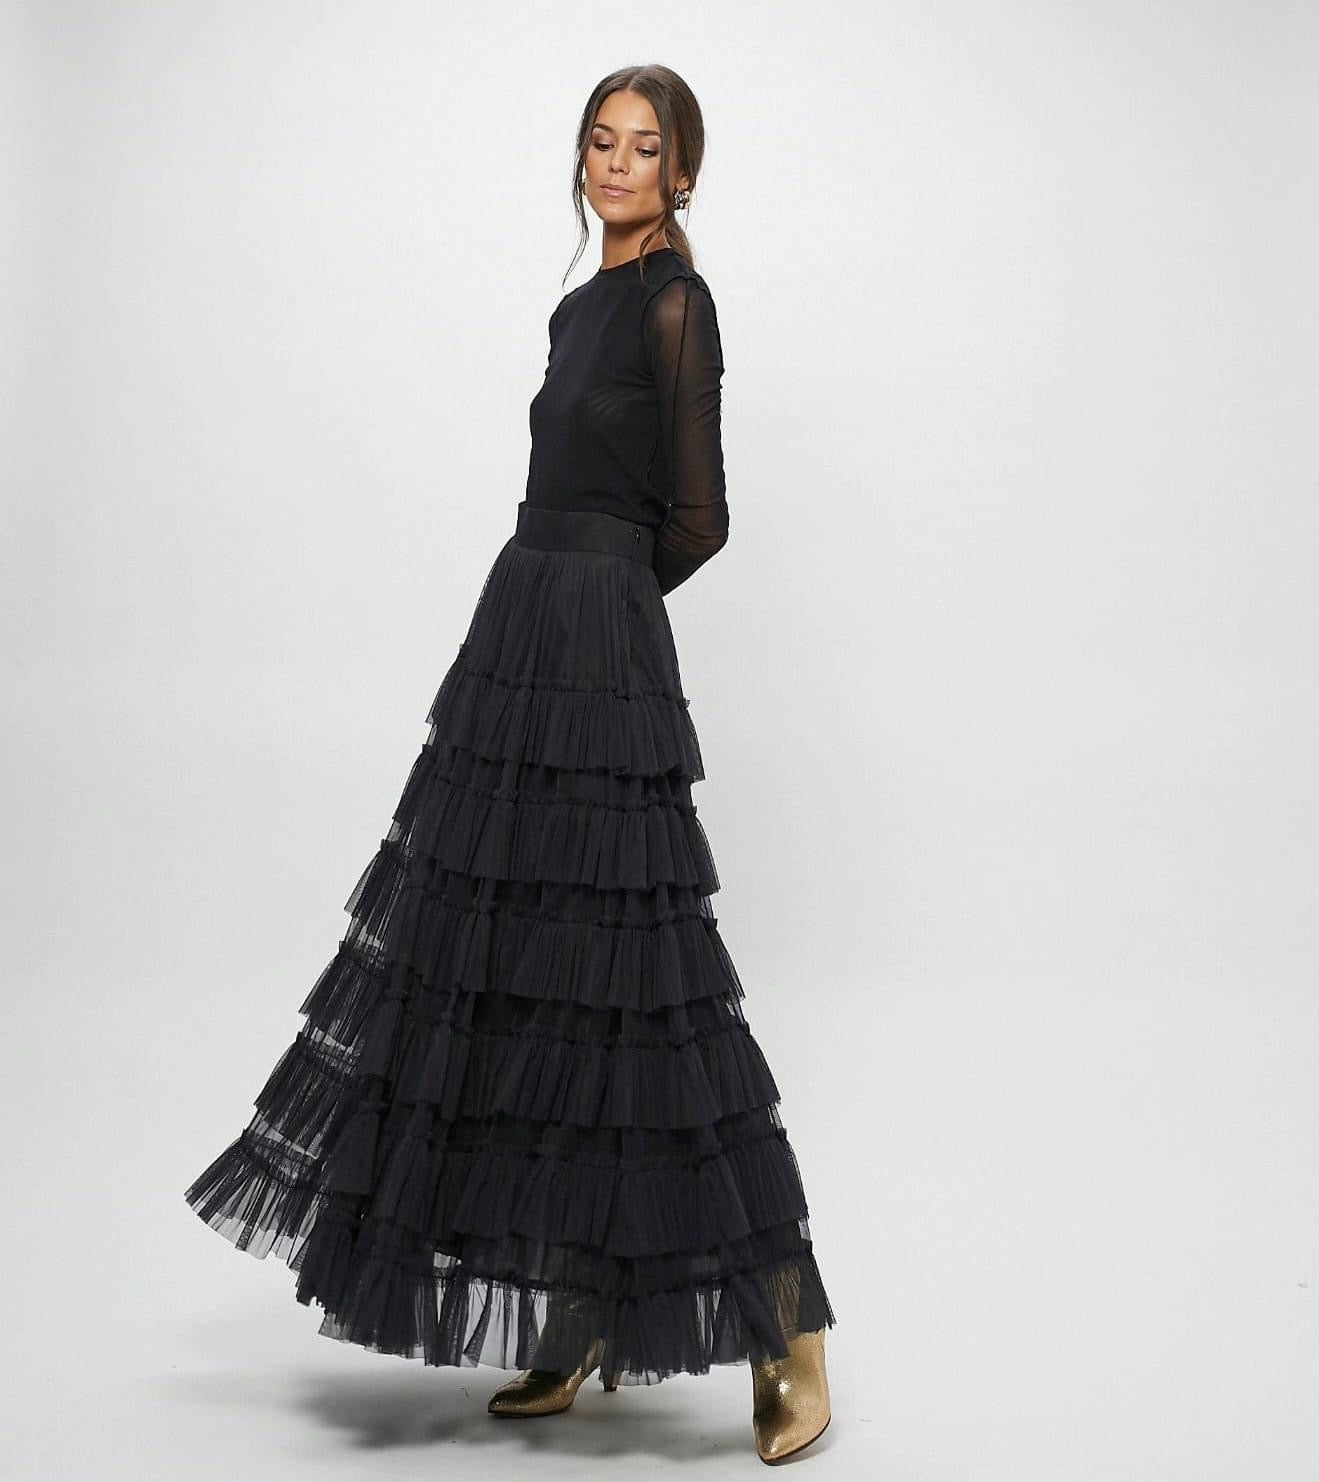 Tulle skirt with ruffles